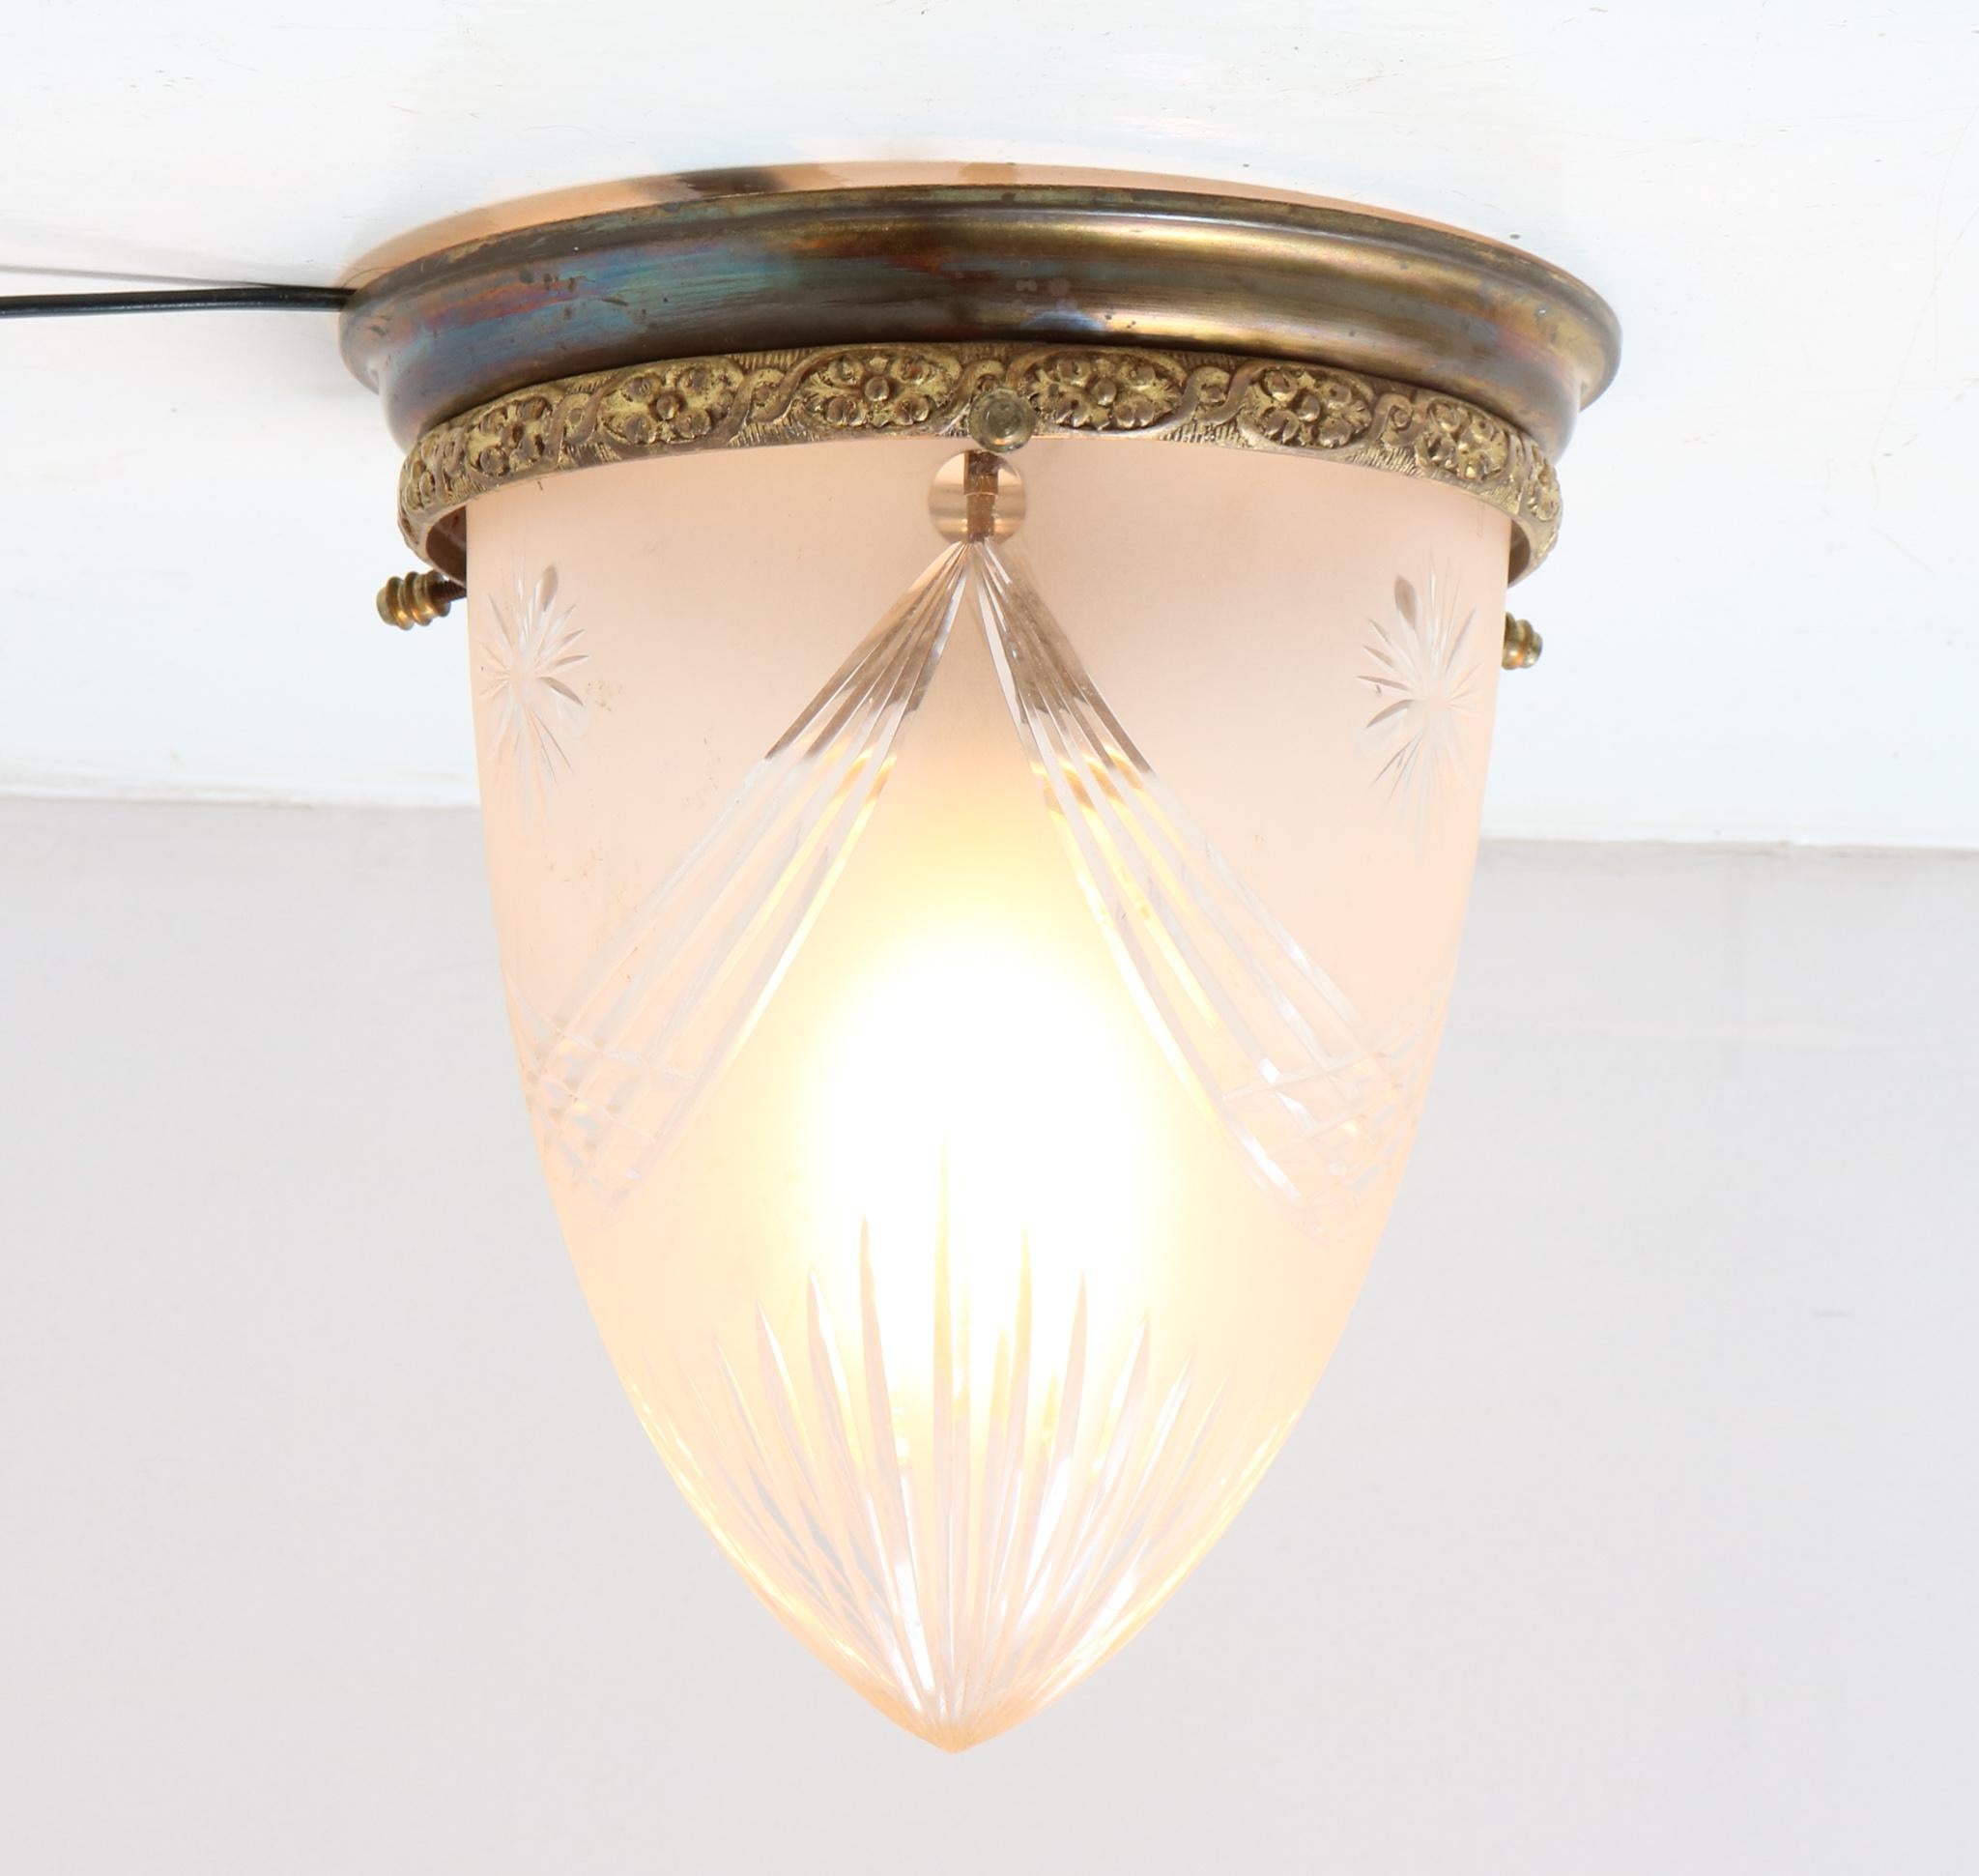 Magnificent and rare Art Nouveau flush mount ceiling light.
Striking French design from the 1900s.
Patinated bronze with original cut blown glass shade.
This wonderful Art Nouveau flush mount ceiling light is rewired with one original
socket for